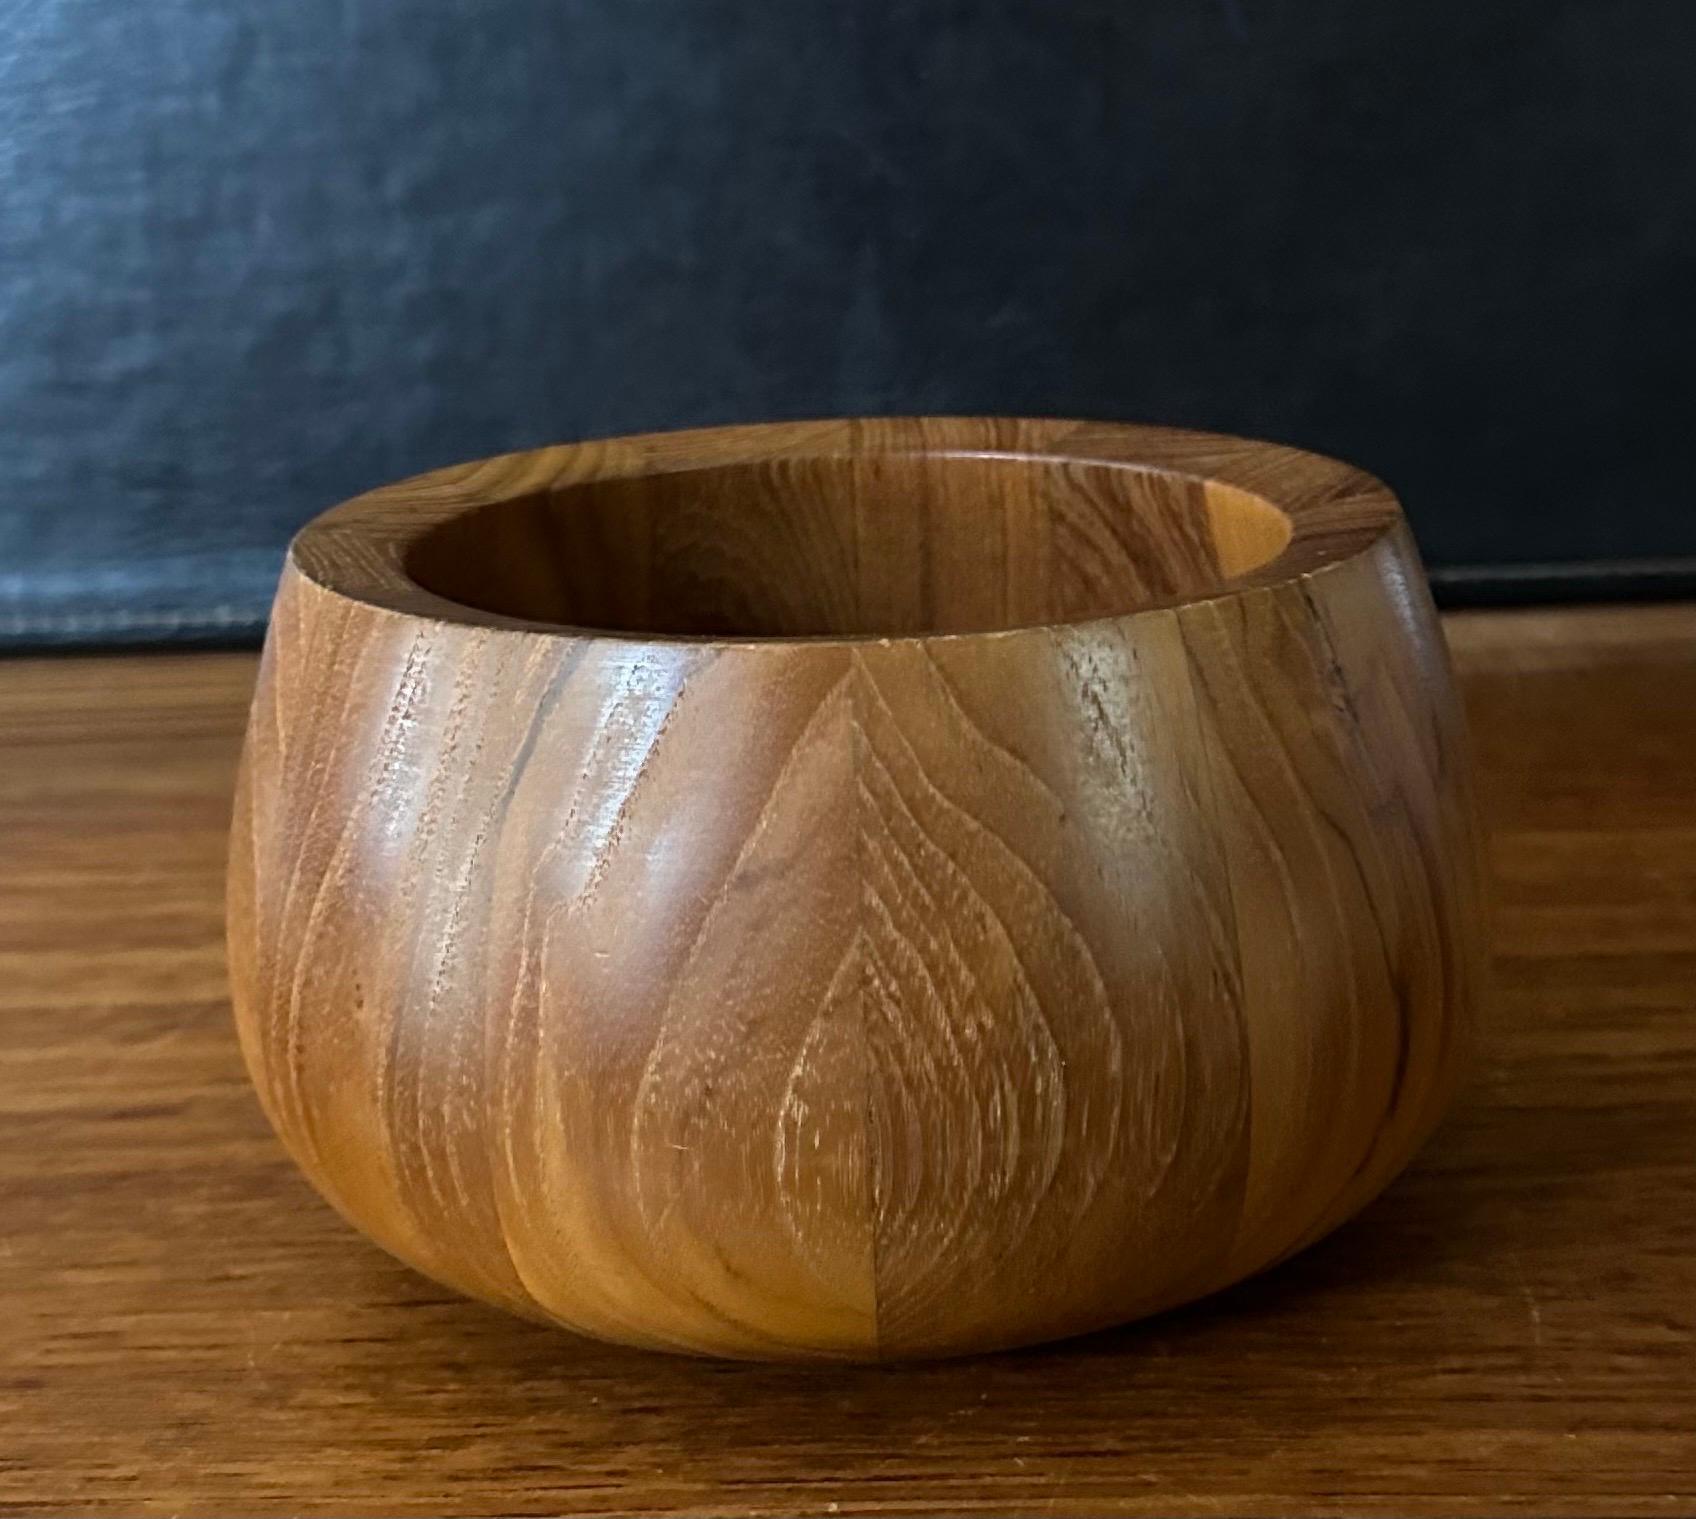 Small Staved Teak Bowl by Jens Quistgaard for Dansk In Good Condition For Sale In San Diego, CA